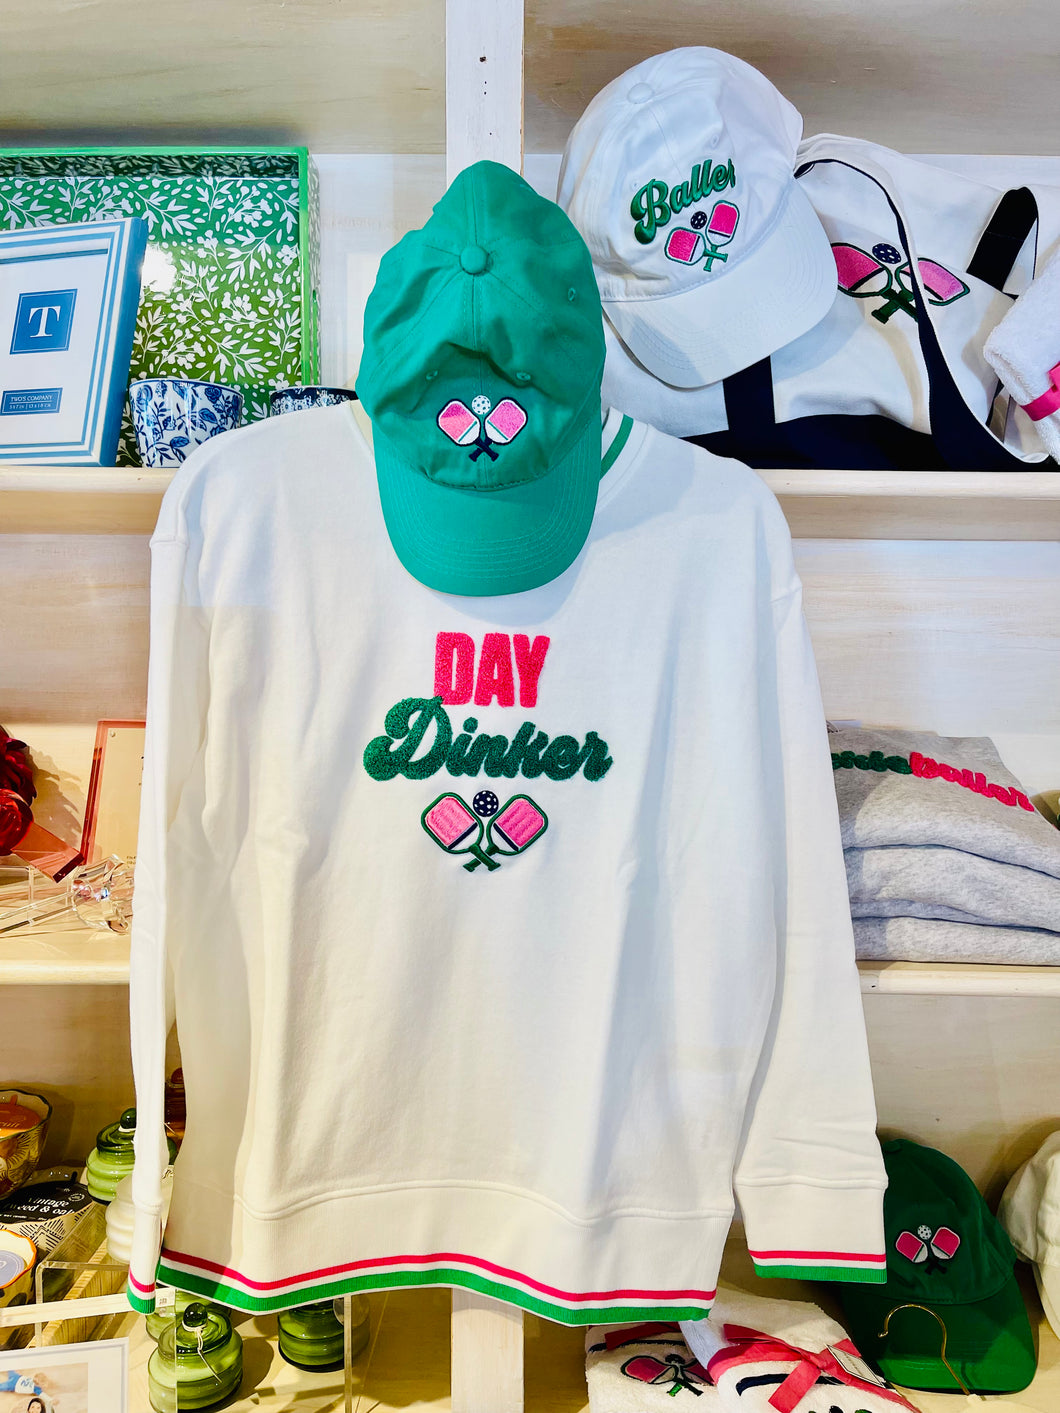 Day Dinker White Sweatshirt with Pink and Green Lettering and Detail